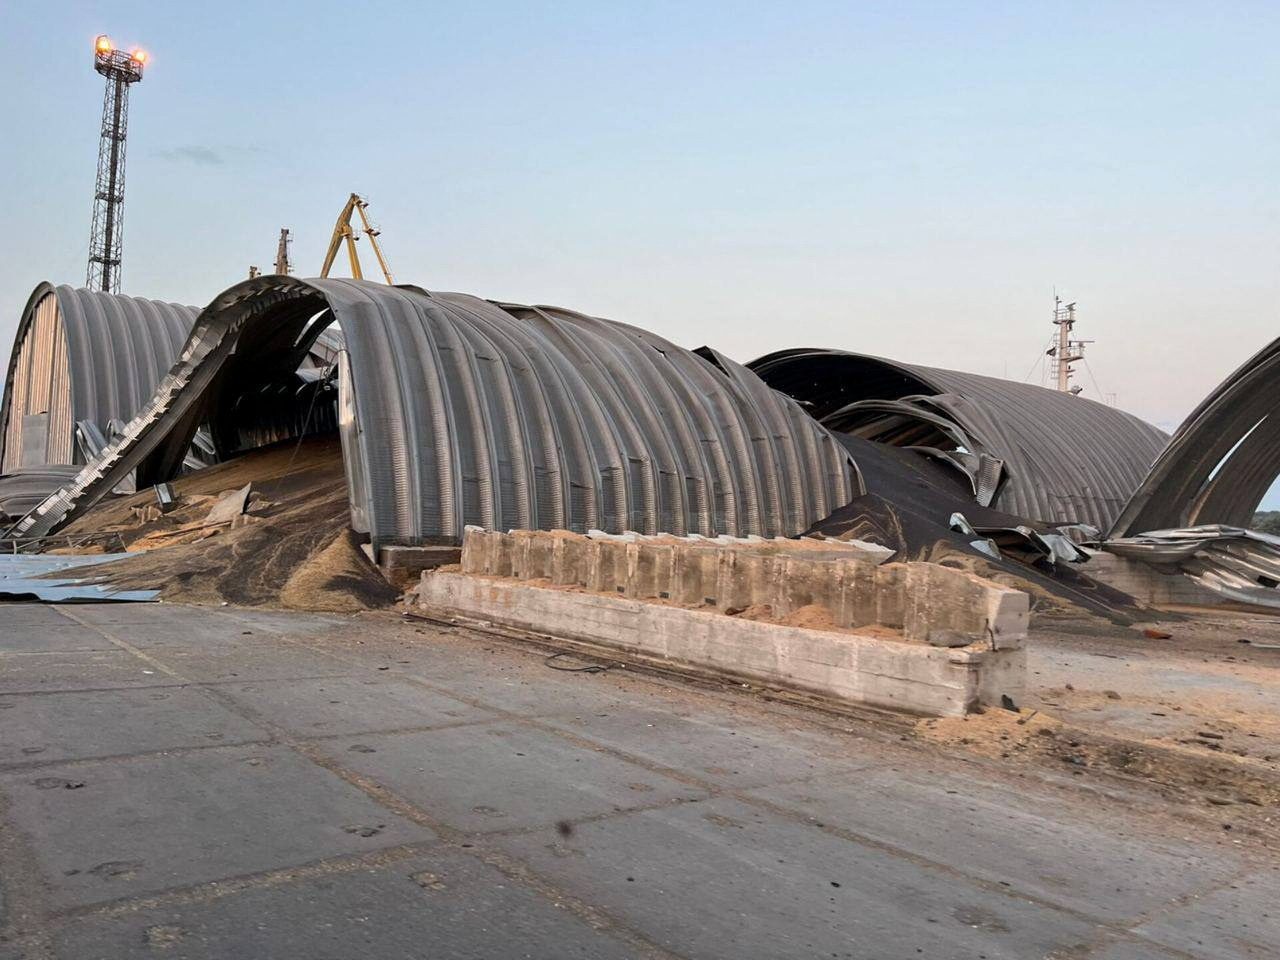 Grain warehouses heavily damaged by a Russian drone attack are seen at a compound of a port on the Danube